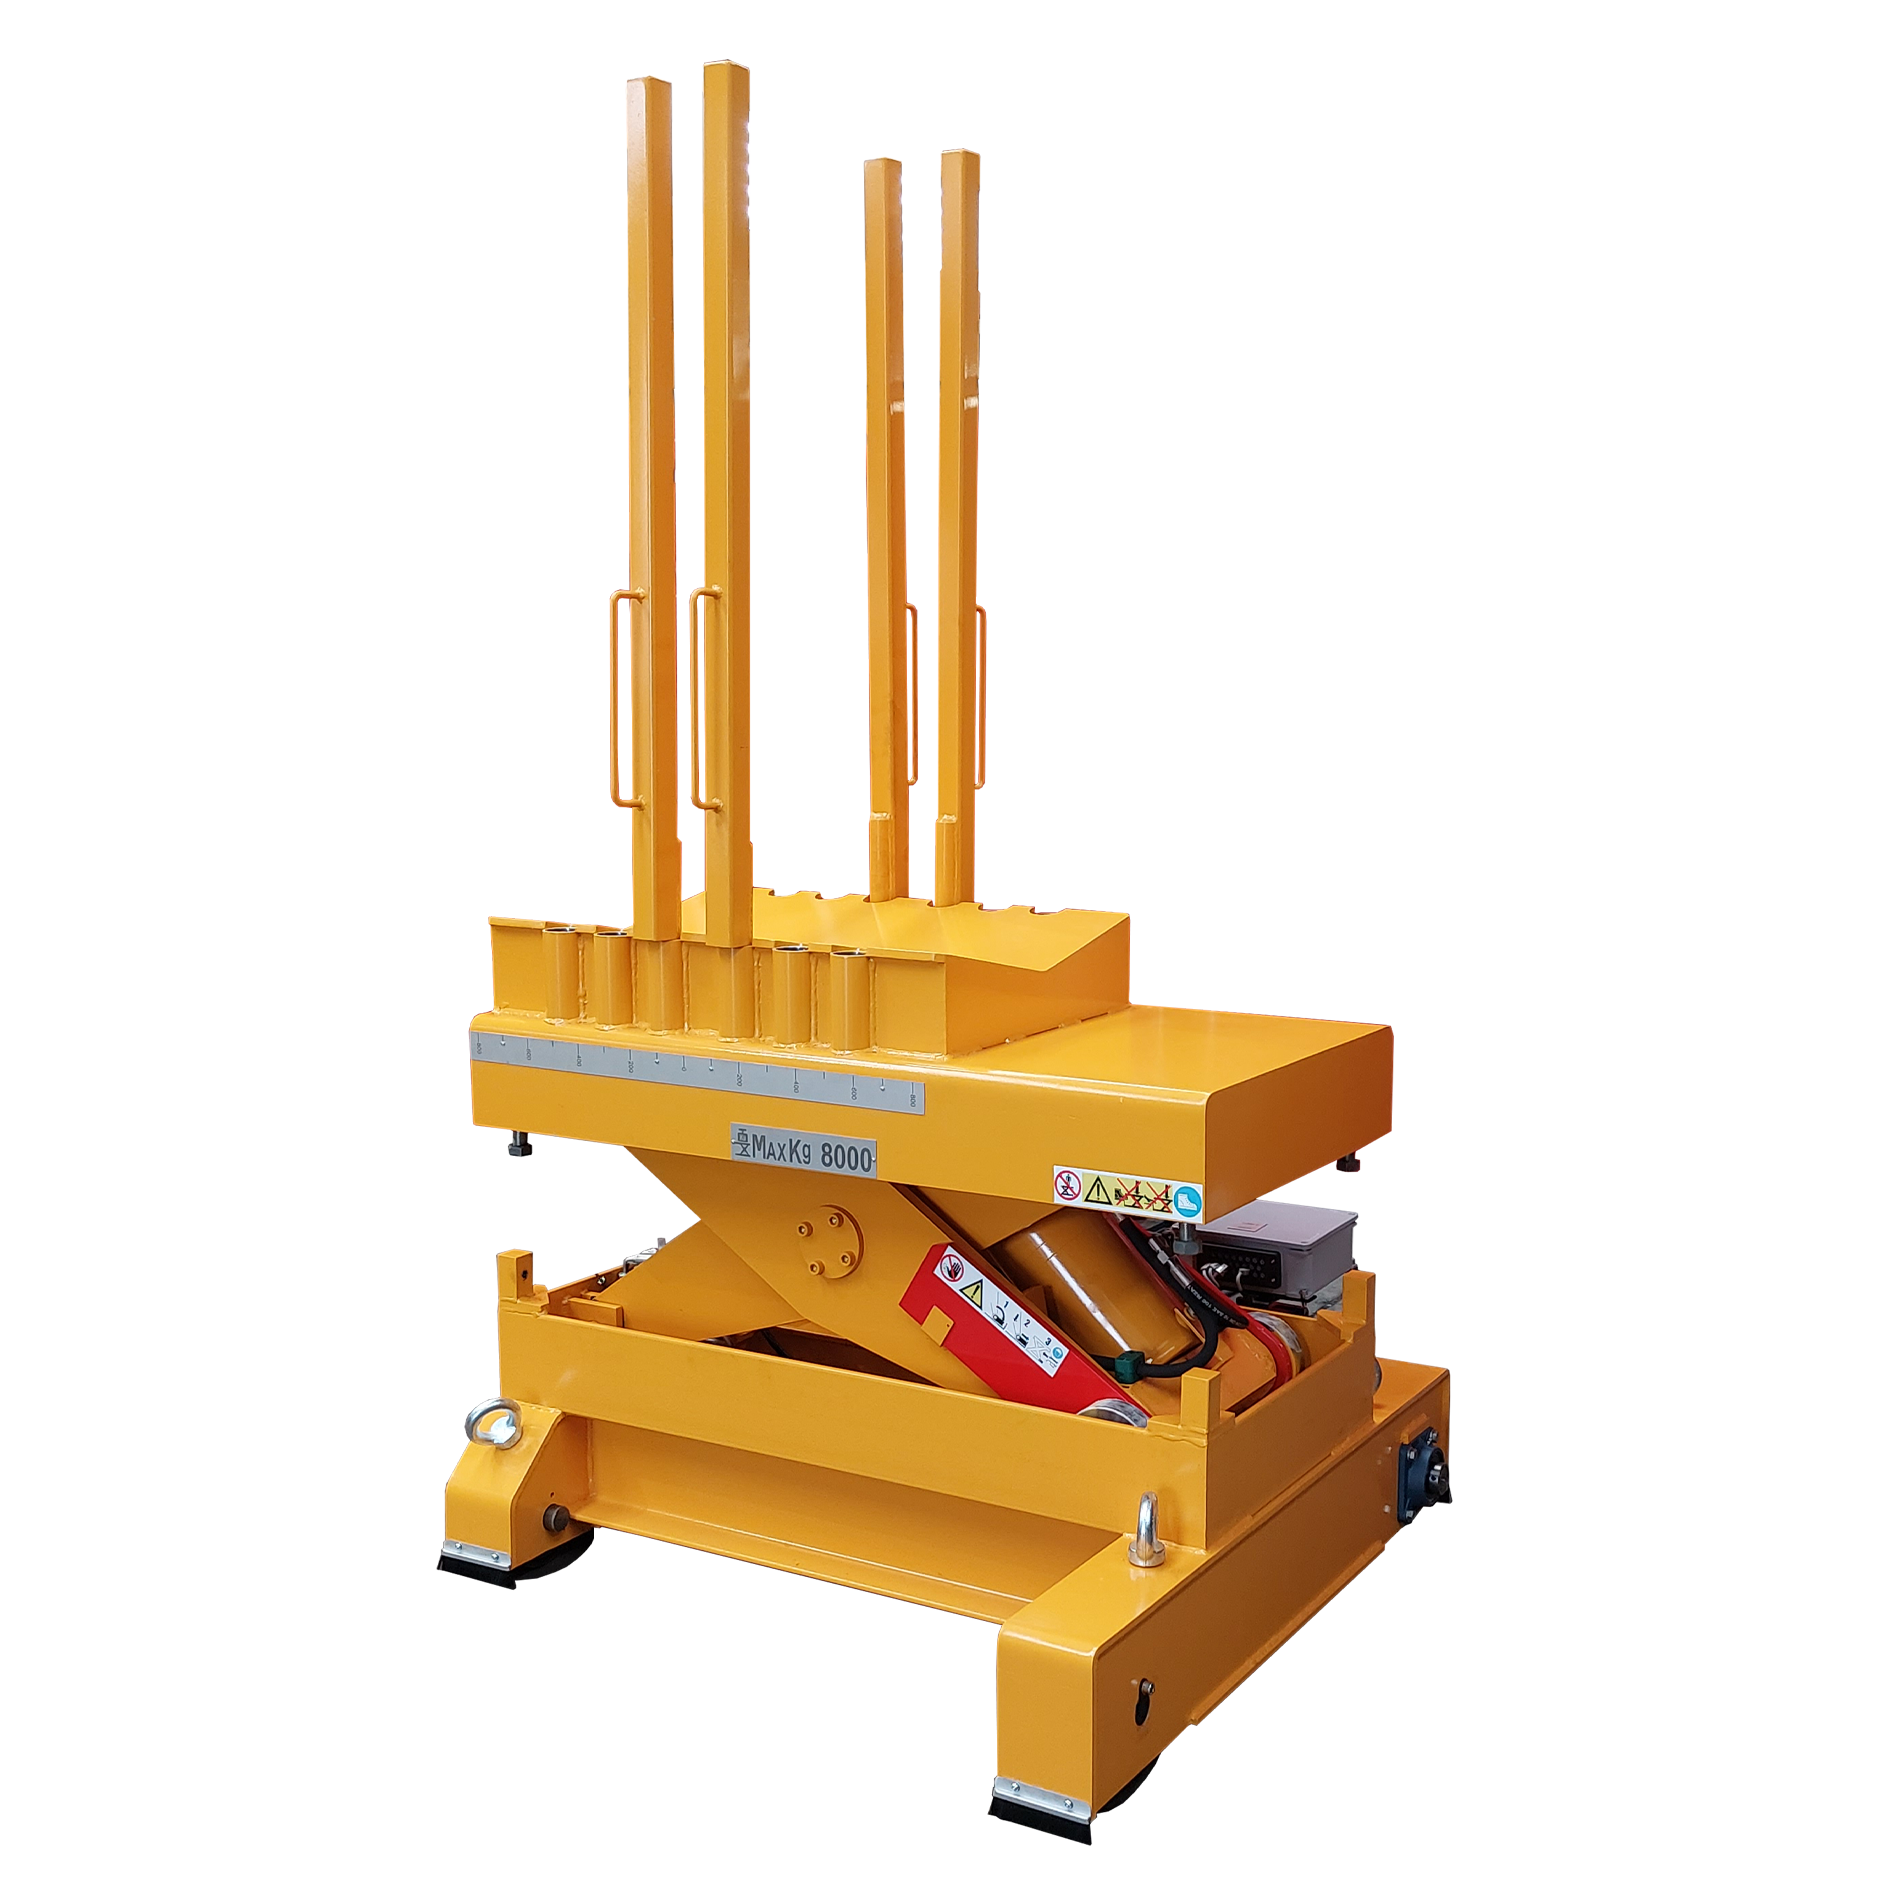 Lifting table with powered lateral traverse and cradle top for coils with adjustable anti-fall stops - coil cars - coil transfer cars - coil handling - roll handling - coil lifting equipment - special industrial platform lifts